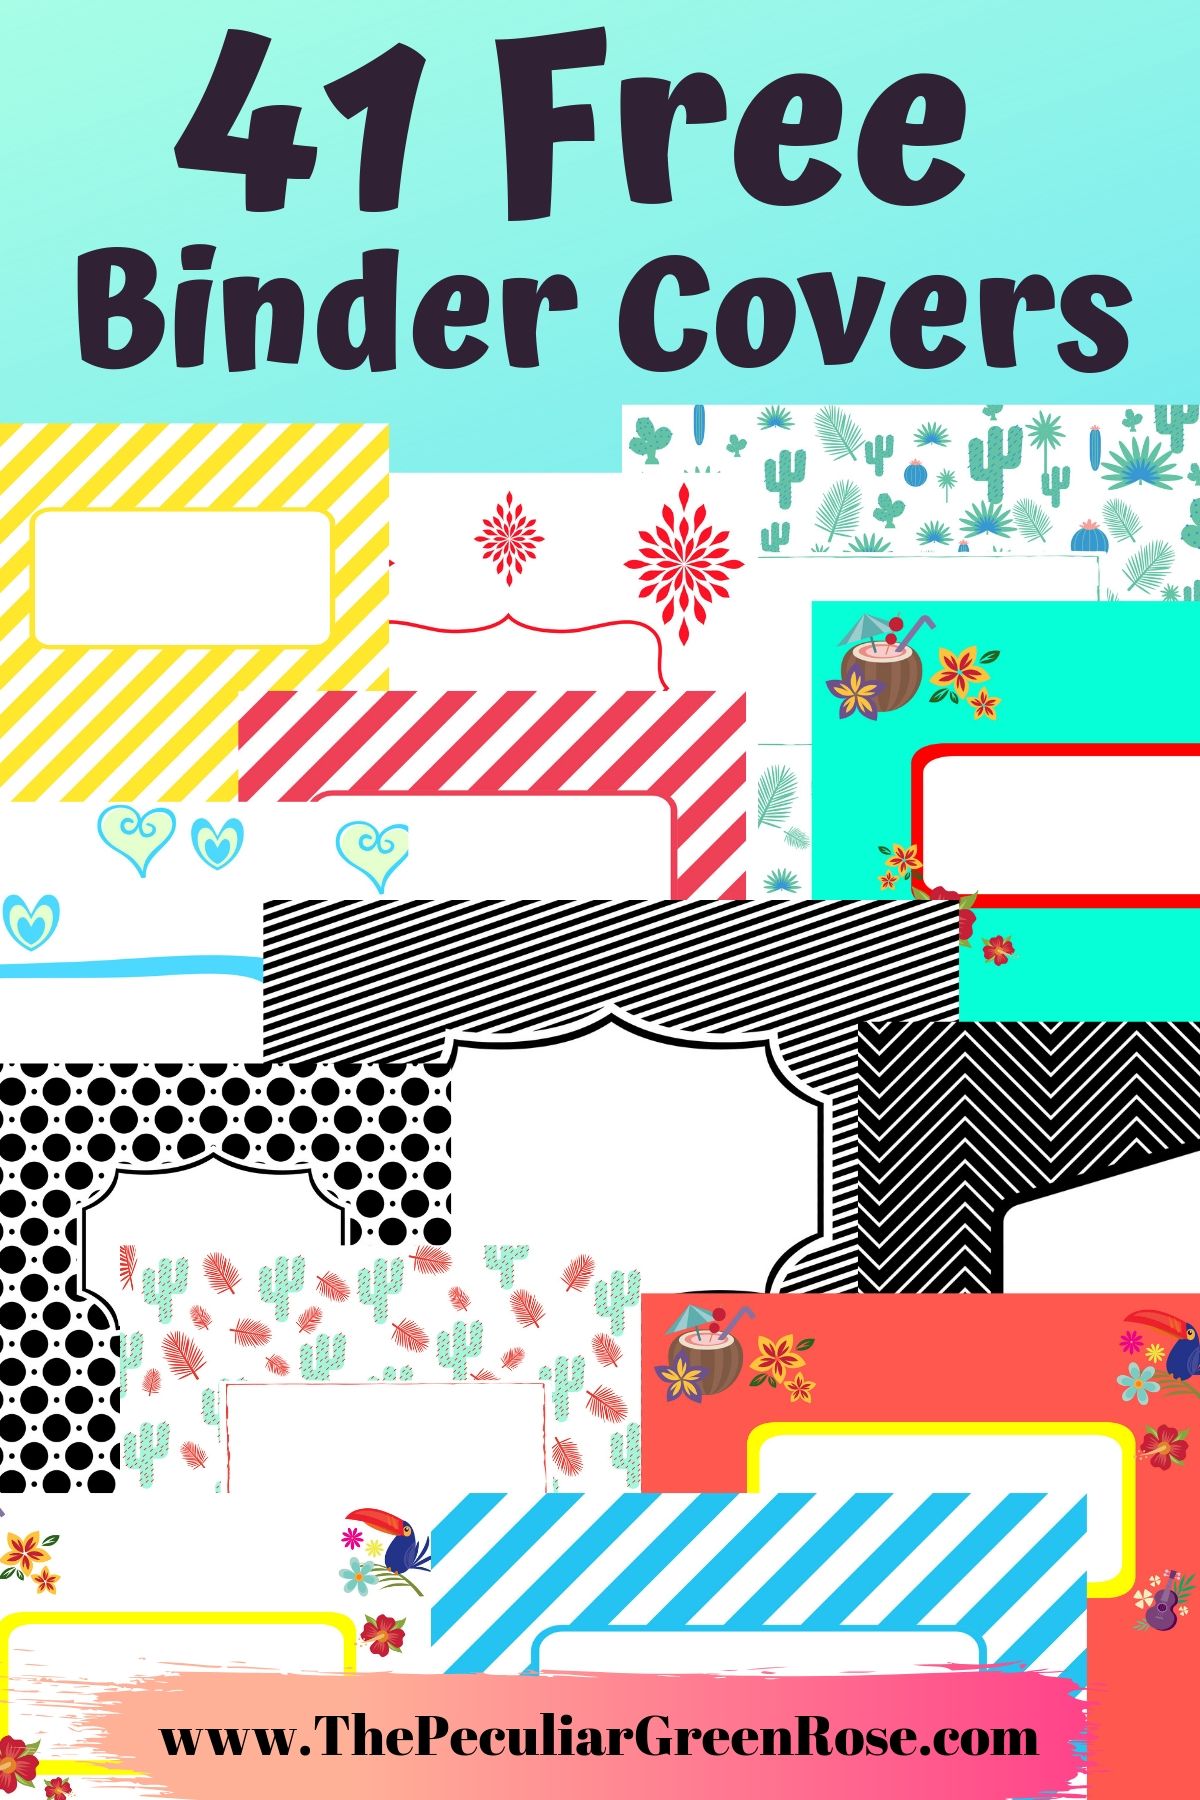 printable binder cover inserts